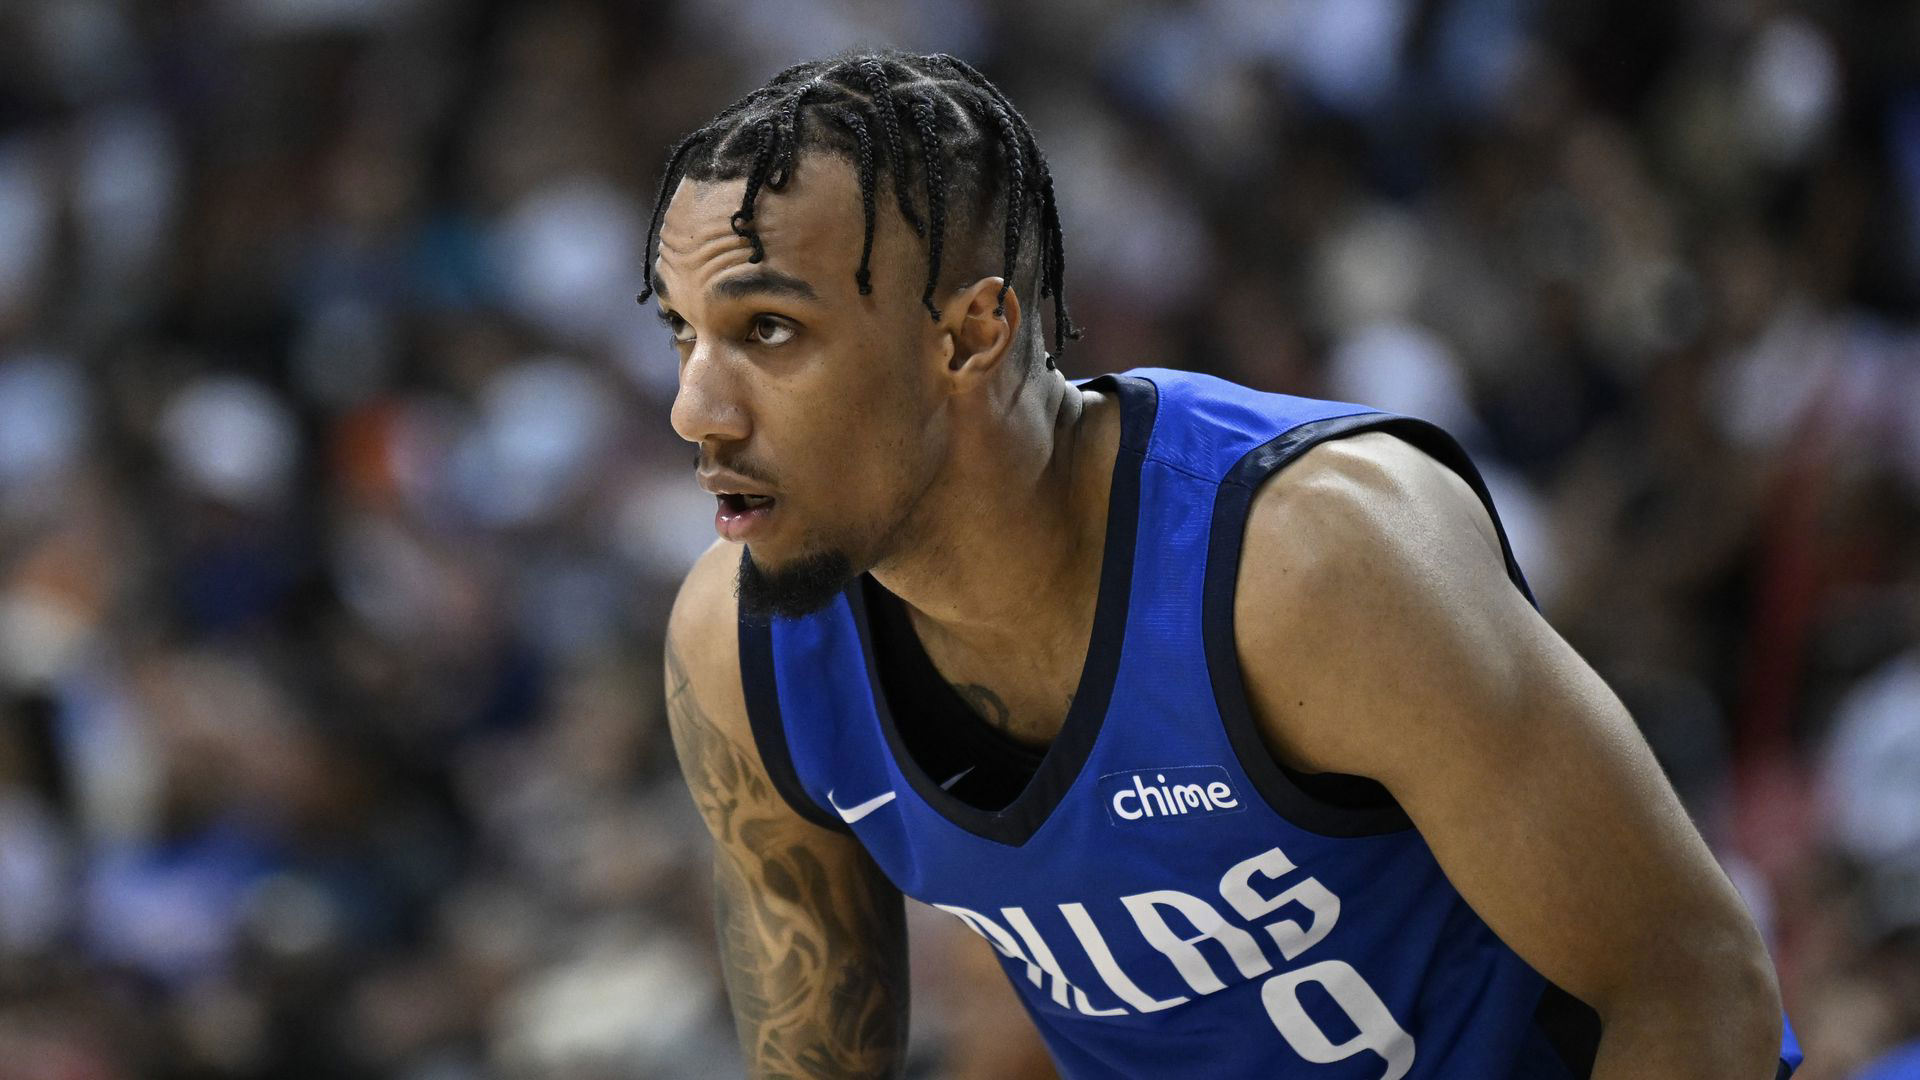 Mavericks Vs Sixers Preview Dallas Looks To Get In The Summer League Win Column Against Philly